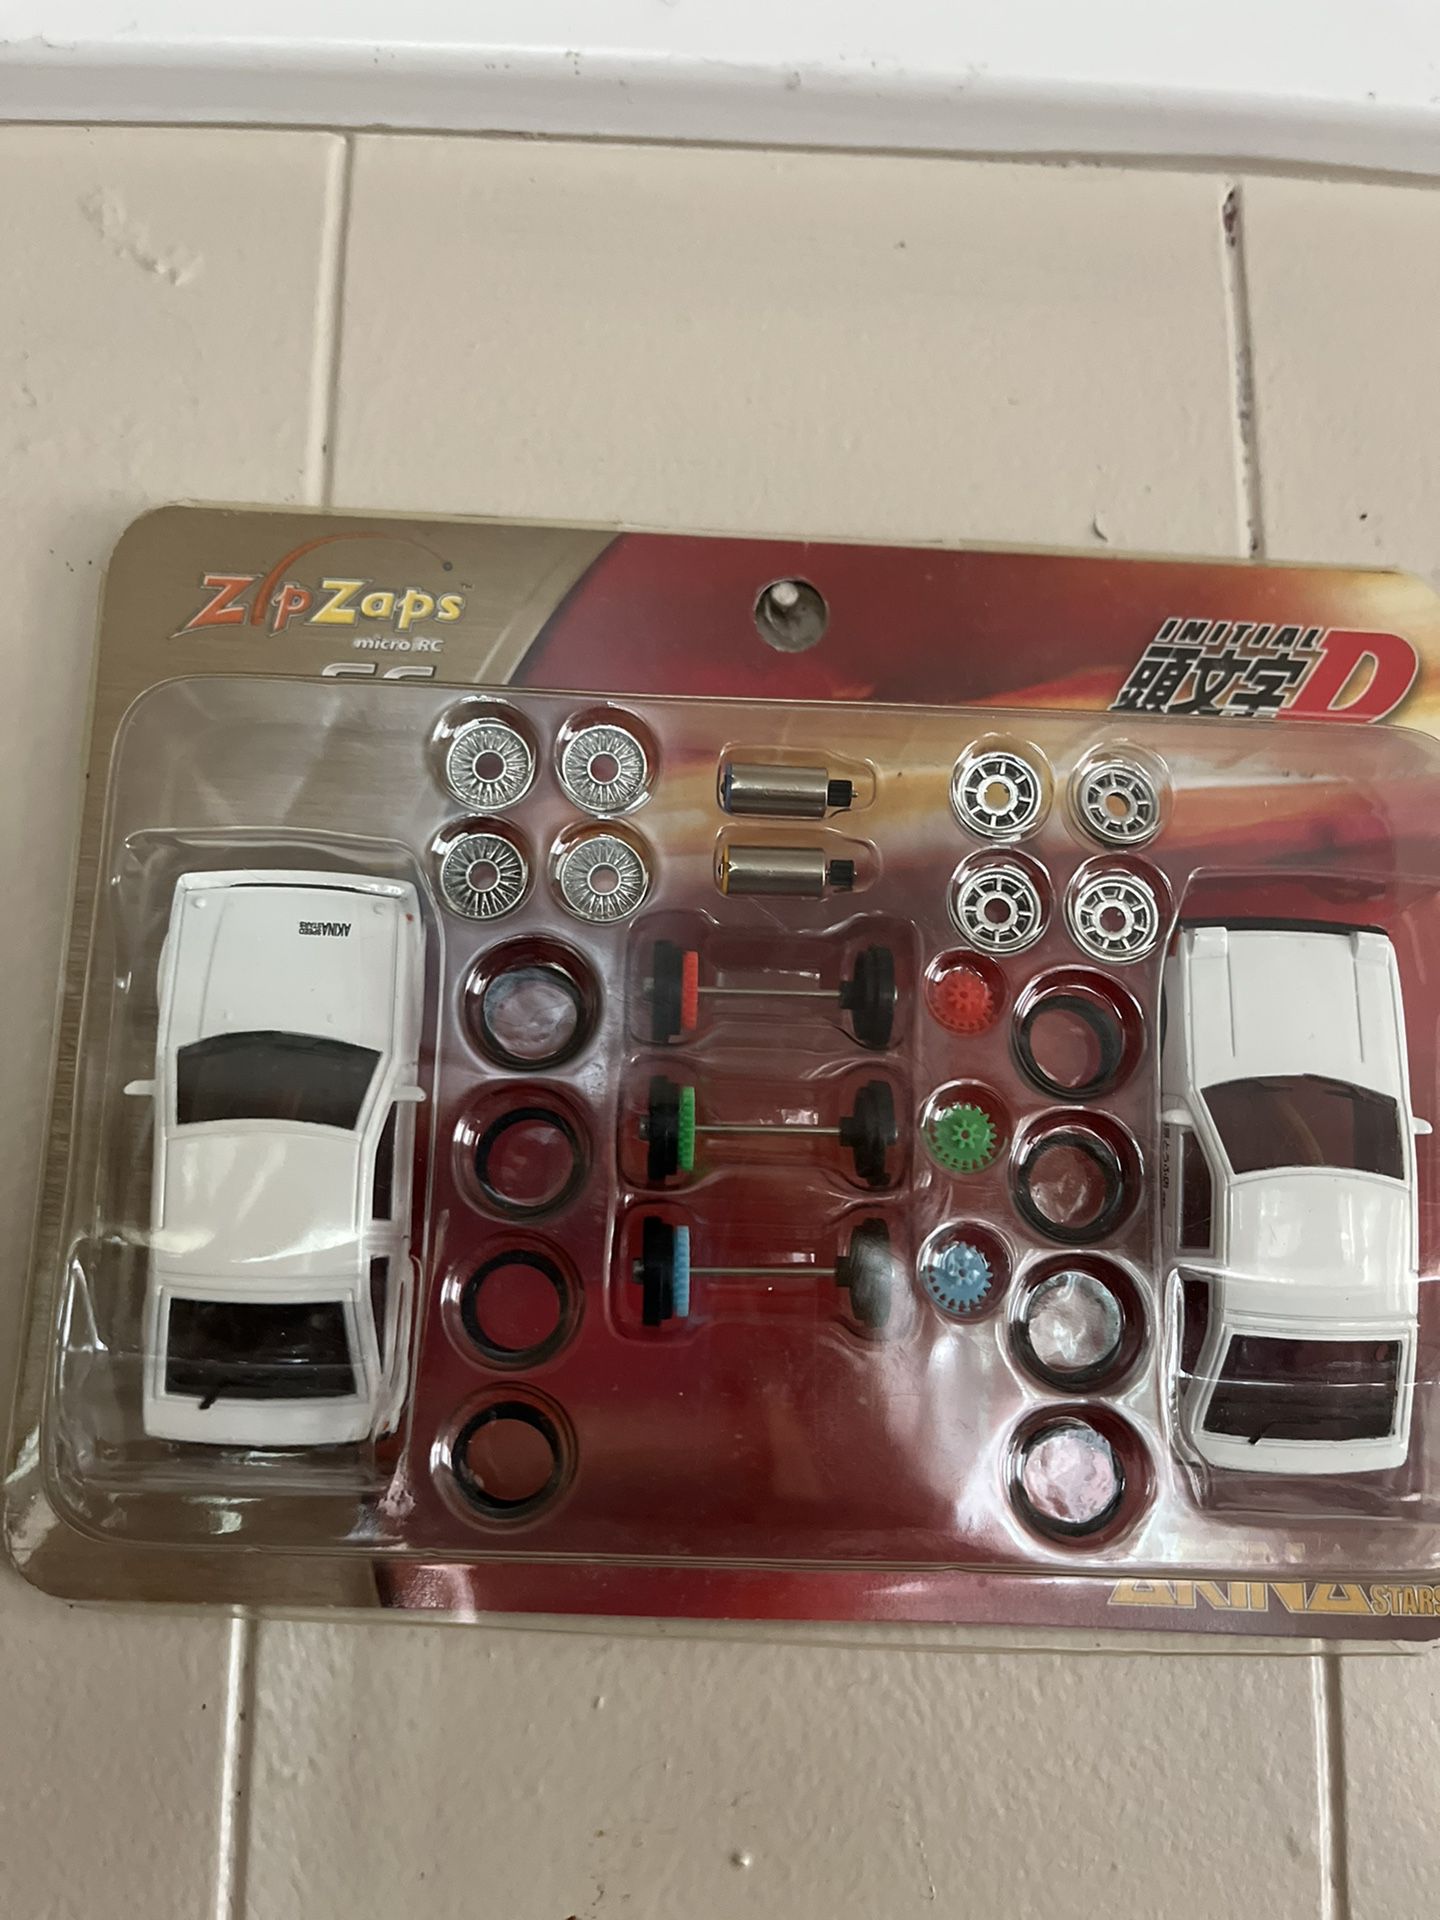 INITIAL D Zip Zaps Micro RC Cars SE Special Edition Tuner Upgrade Kit 